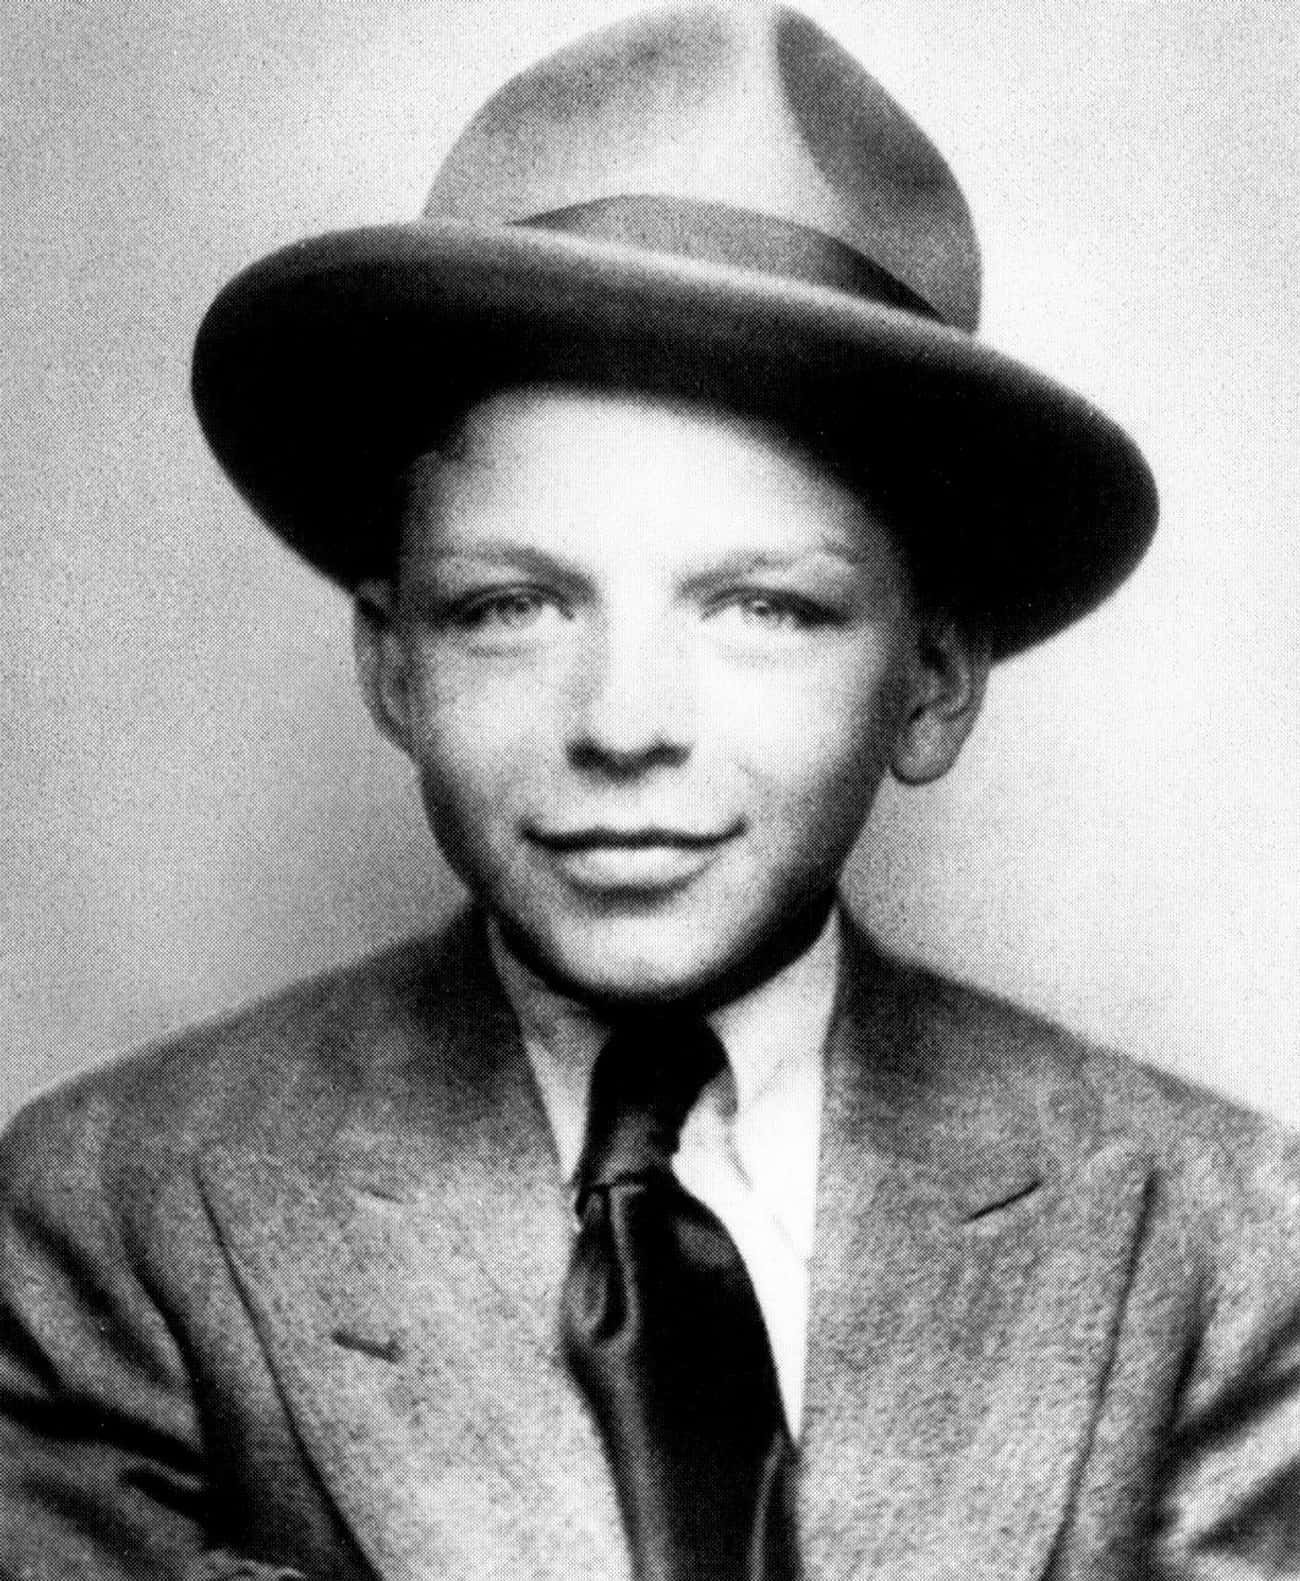 Young Frank Sinatra as a Child